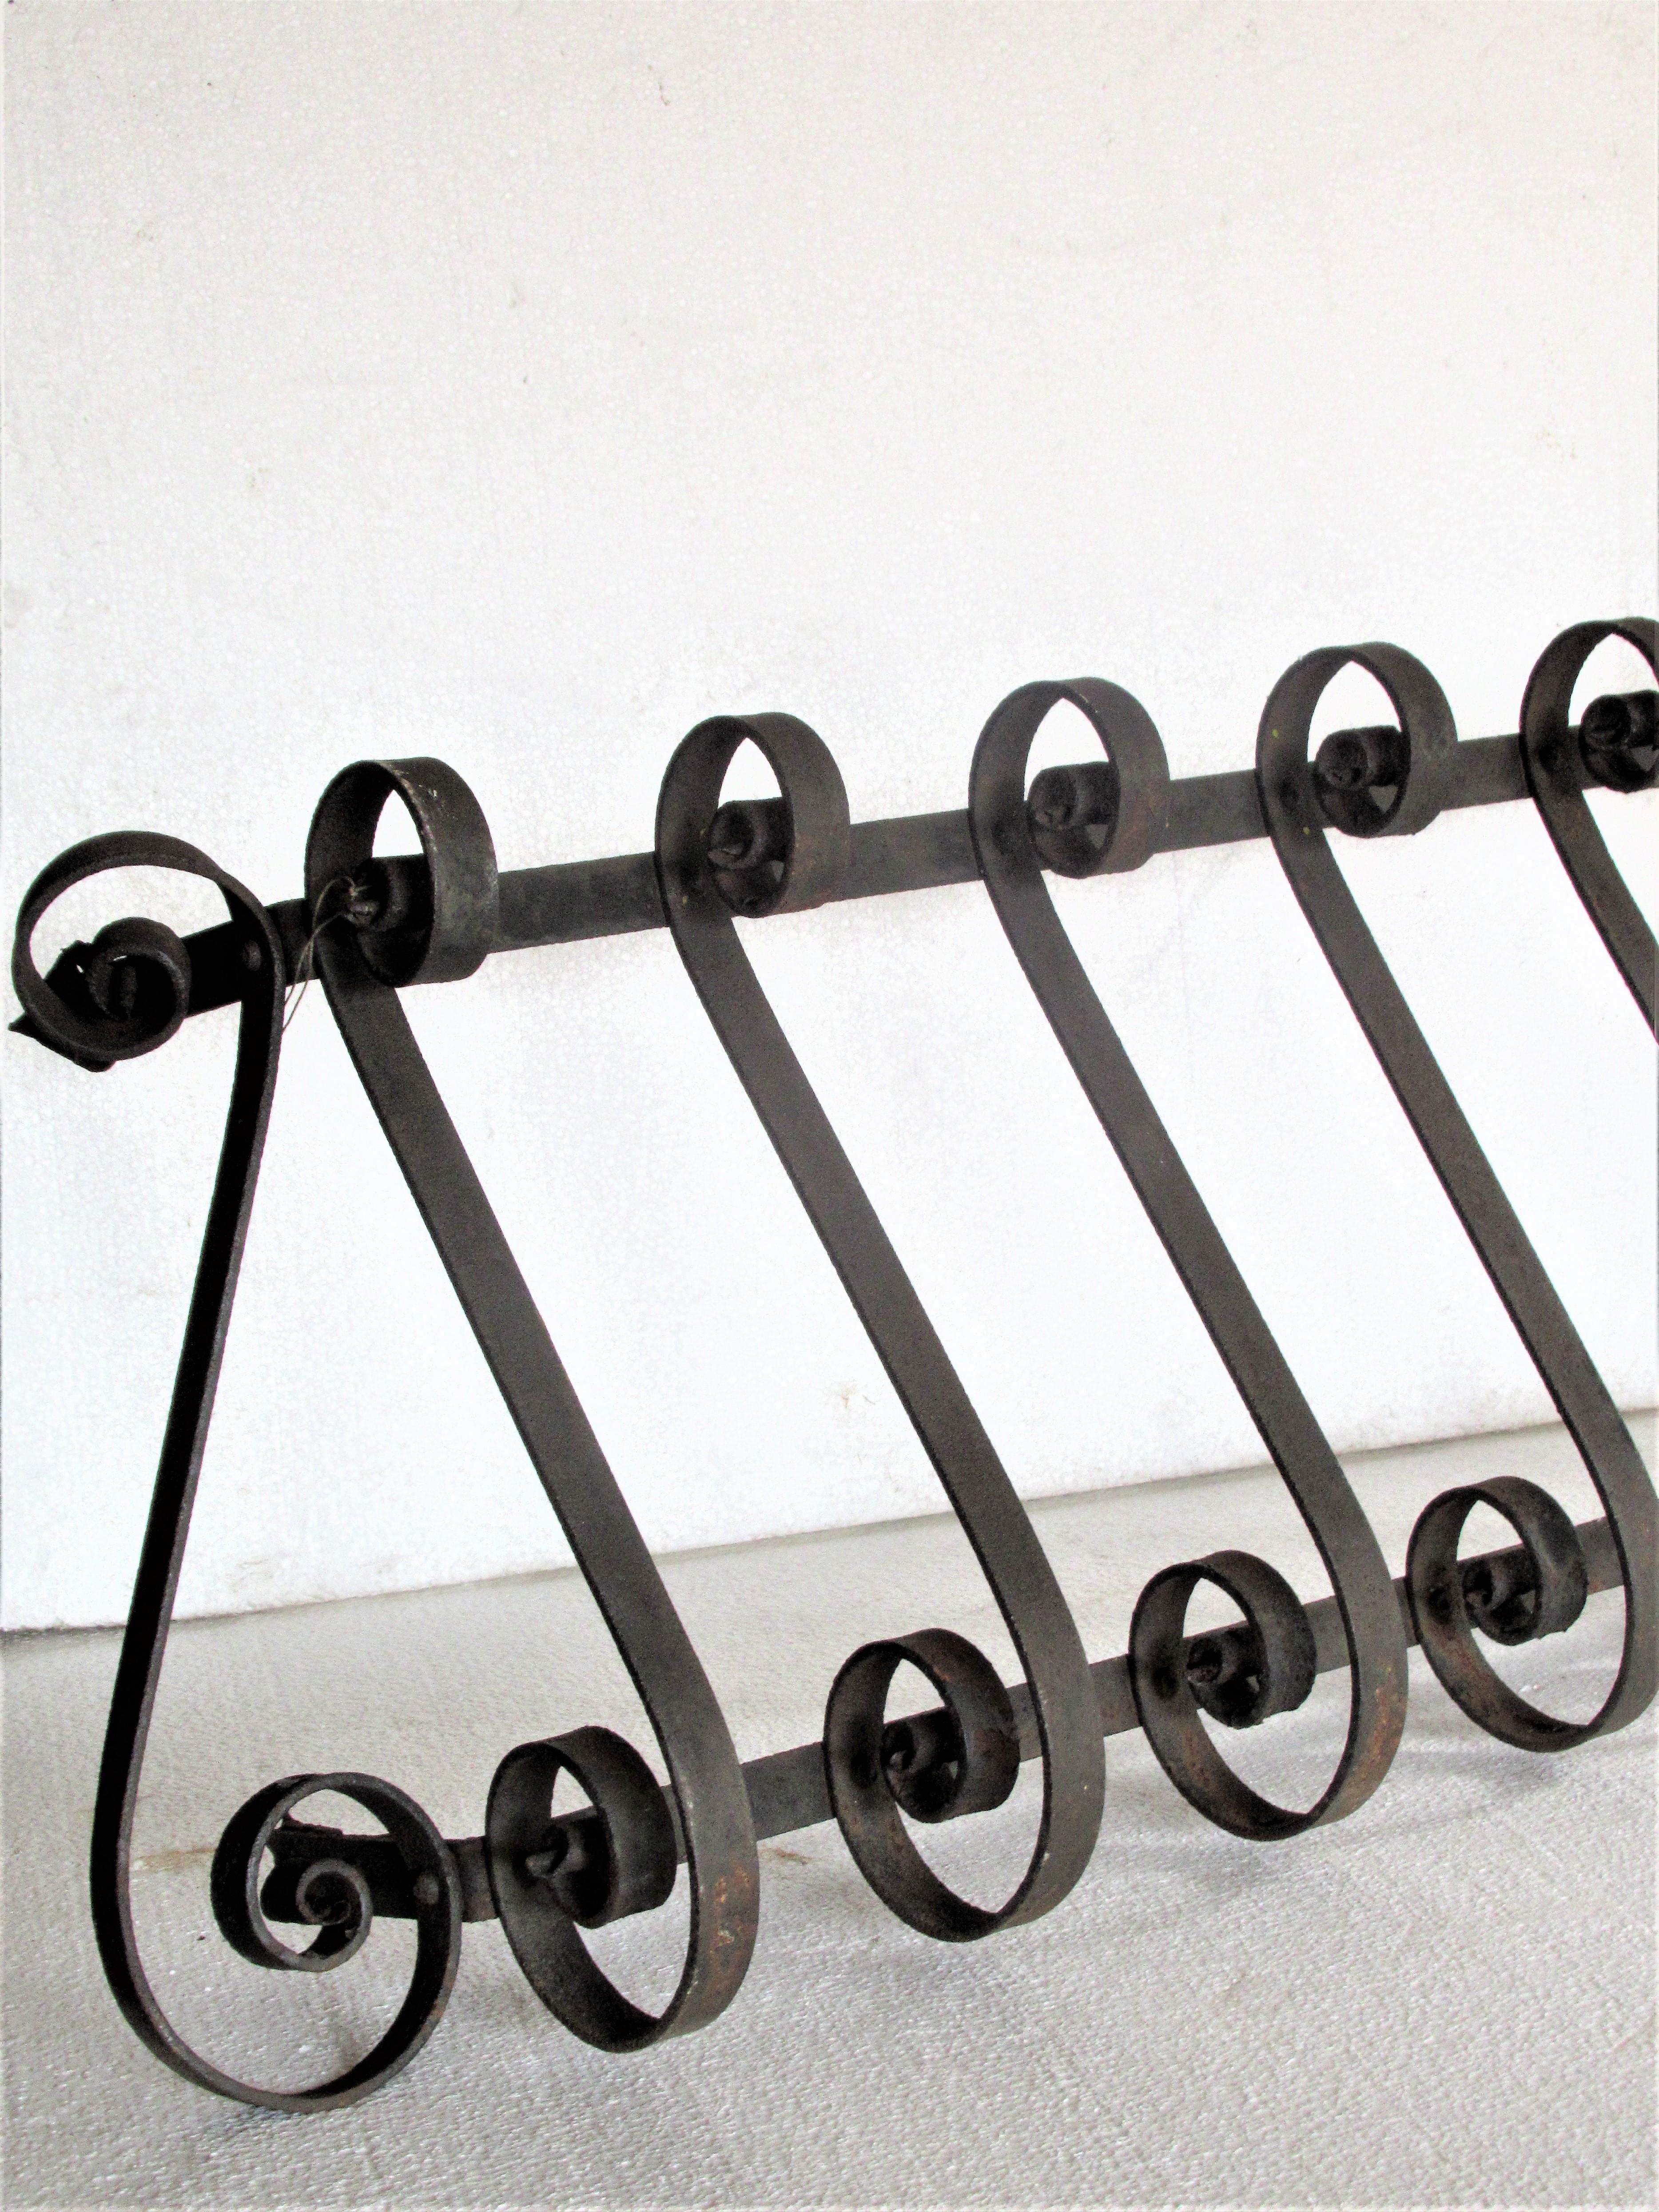 Antique Architectural Hand Wrought Iron Window Box Railing 5